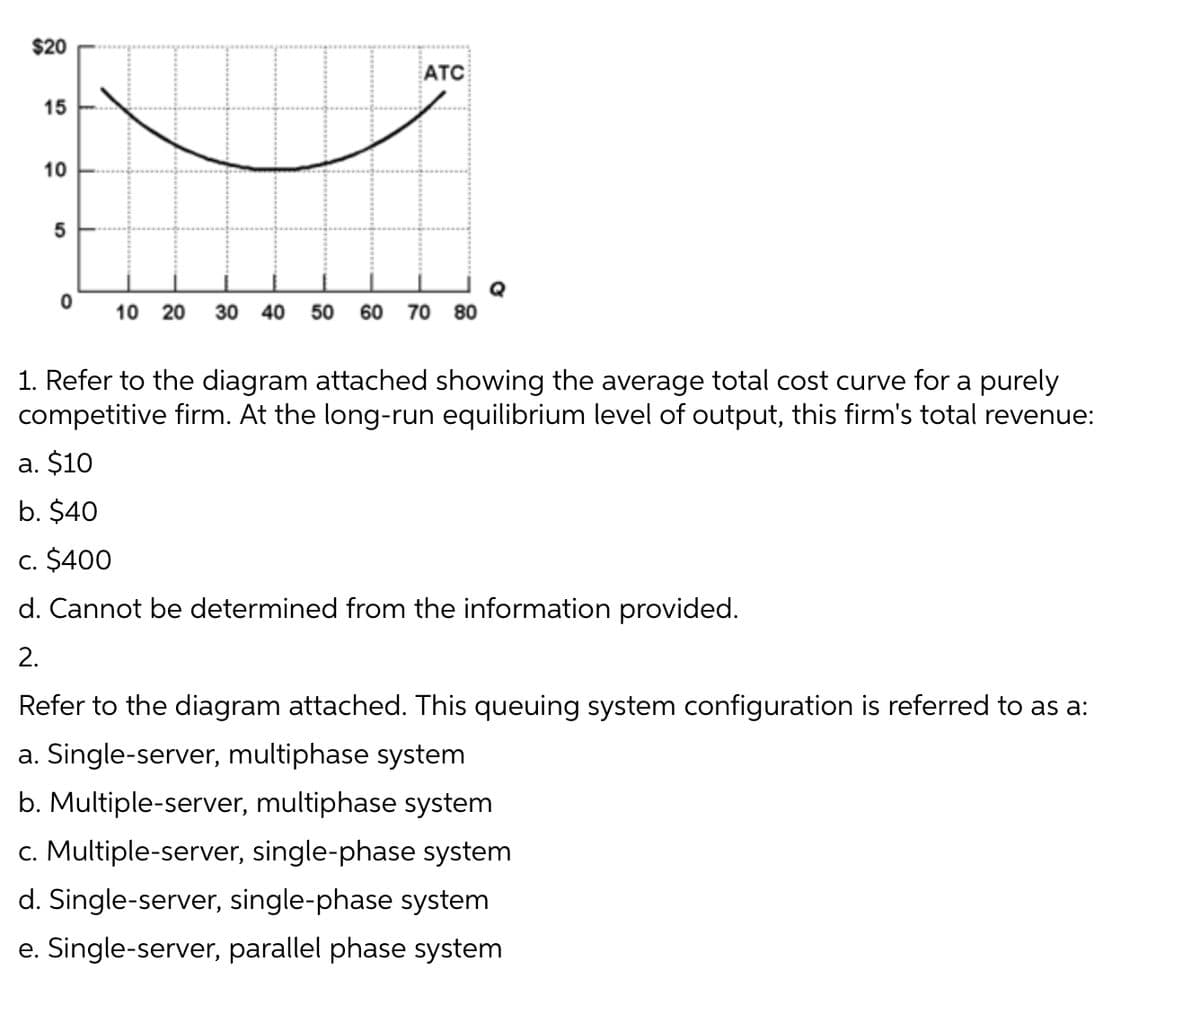 $20
ATC
15
Q
80
10
20
30 40
50
60
70
1. Refer to the diagram attached showing the average total cost curve for a purely
competitive firm. At the long-run equilibrium level of output, this firm's total revenue:
a. $10
b. $40
c. $400
d. Cannot be determined from the information provided.
2.
Refer to the diagram attached. This queuing system configuration is referred to as a:
a. Single-server, multiphase system
b. Multiple-server, multiphase system
c. Multiple-server, single-phase system
d. Single-server, single-phase system
e. Single-server, parallel phase system
10
